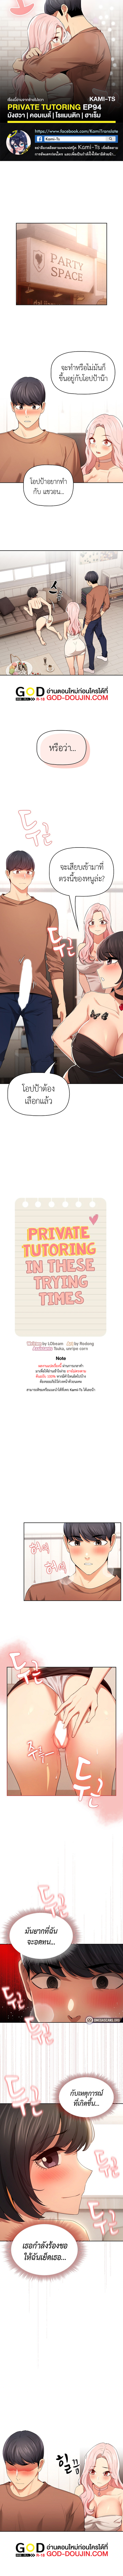 Private Tutoring in These Trying Times1